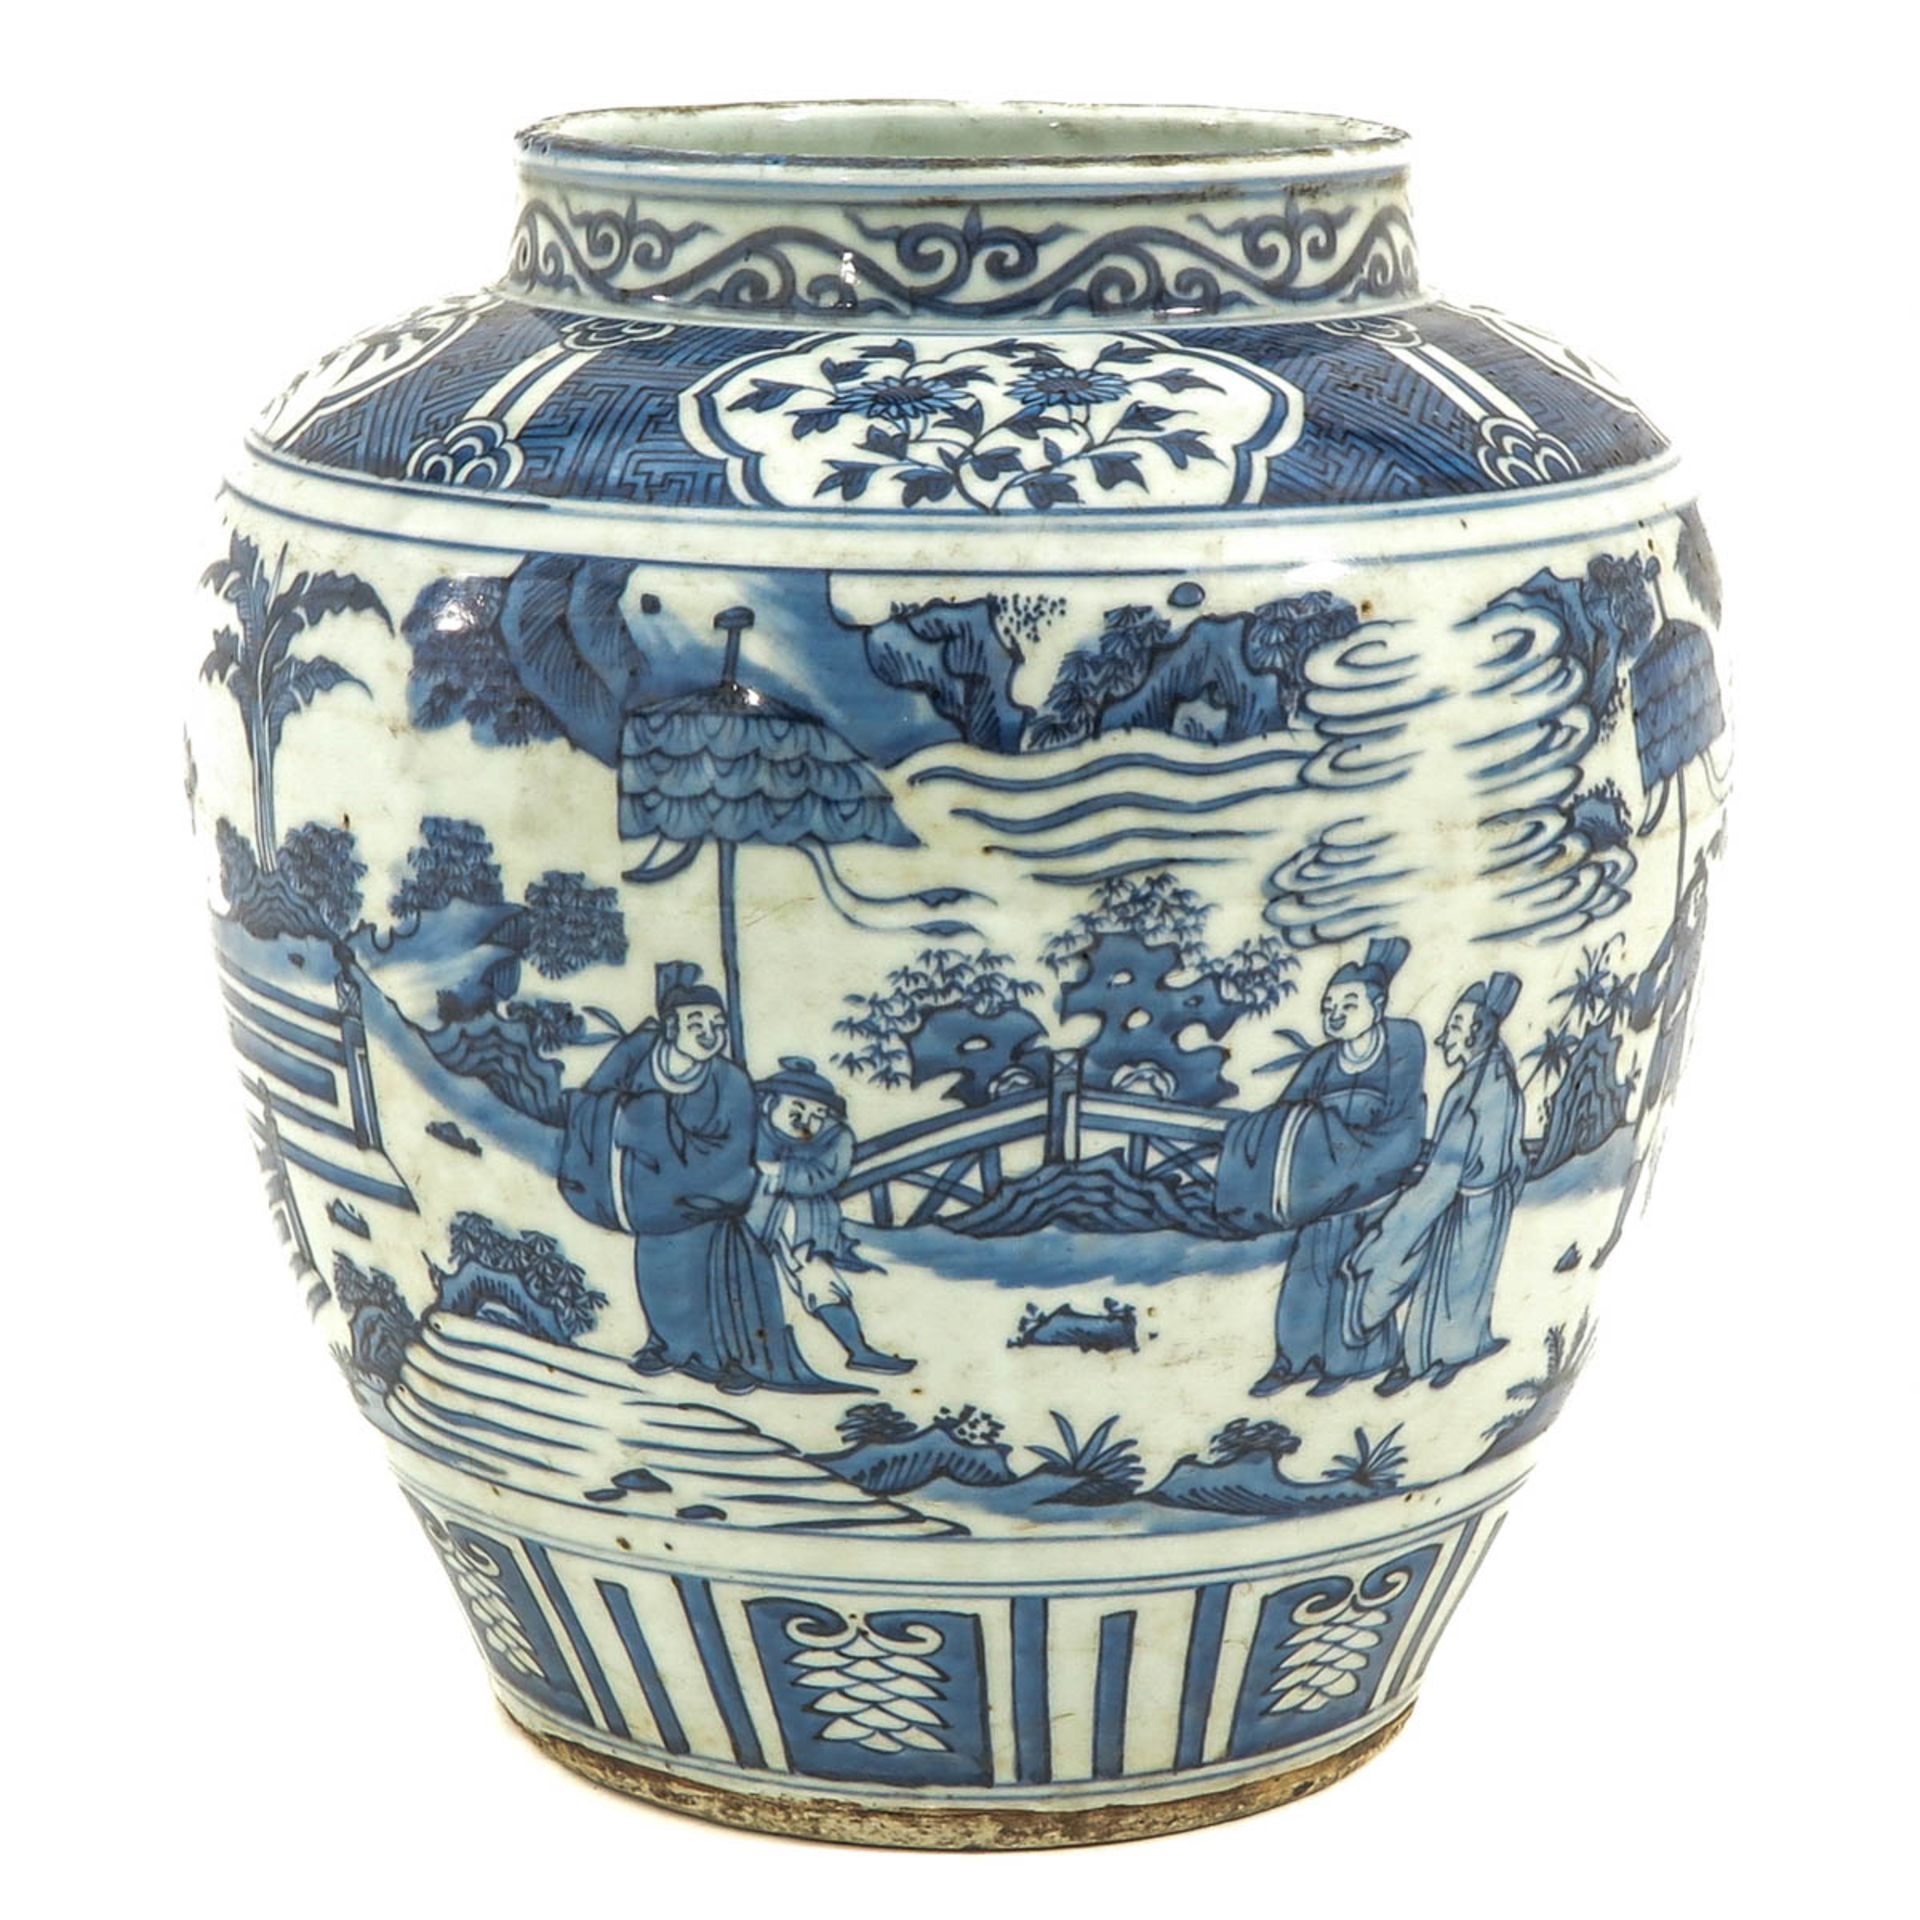 A Large Blue and White Pot